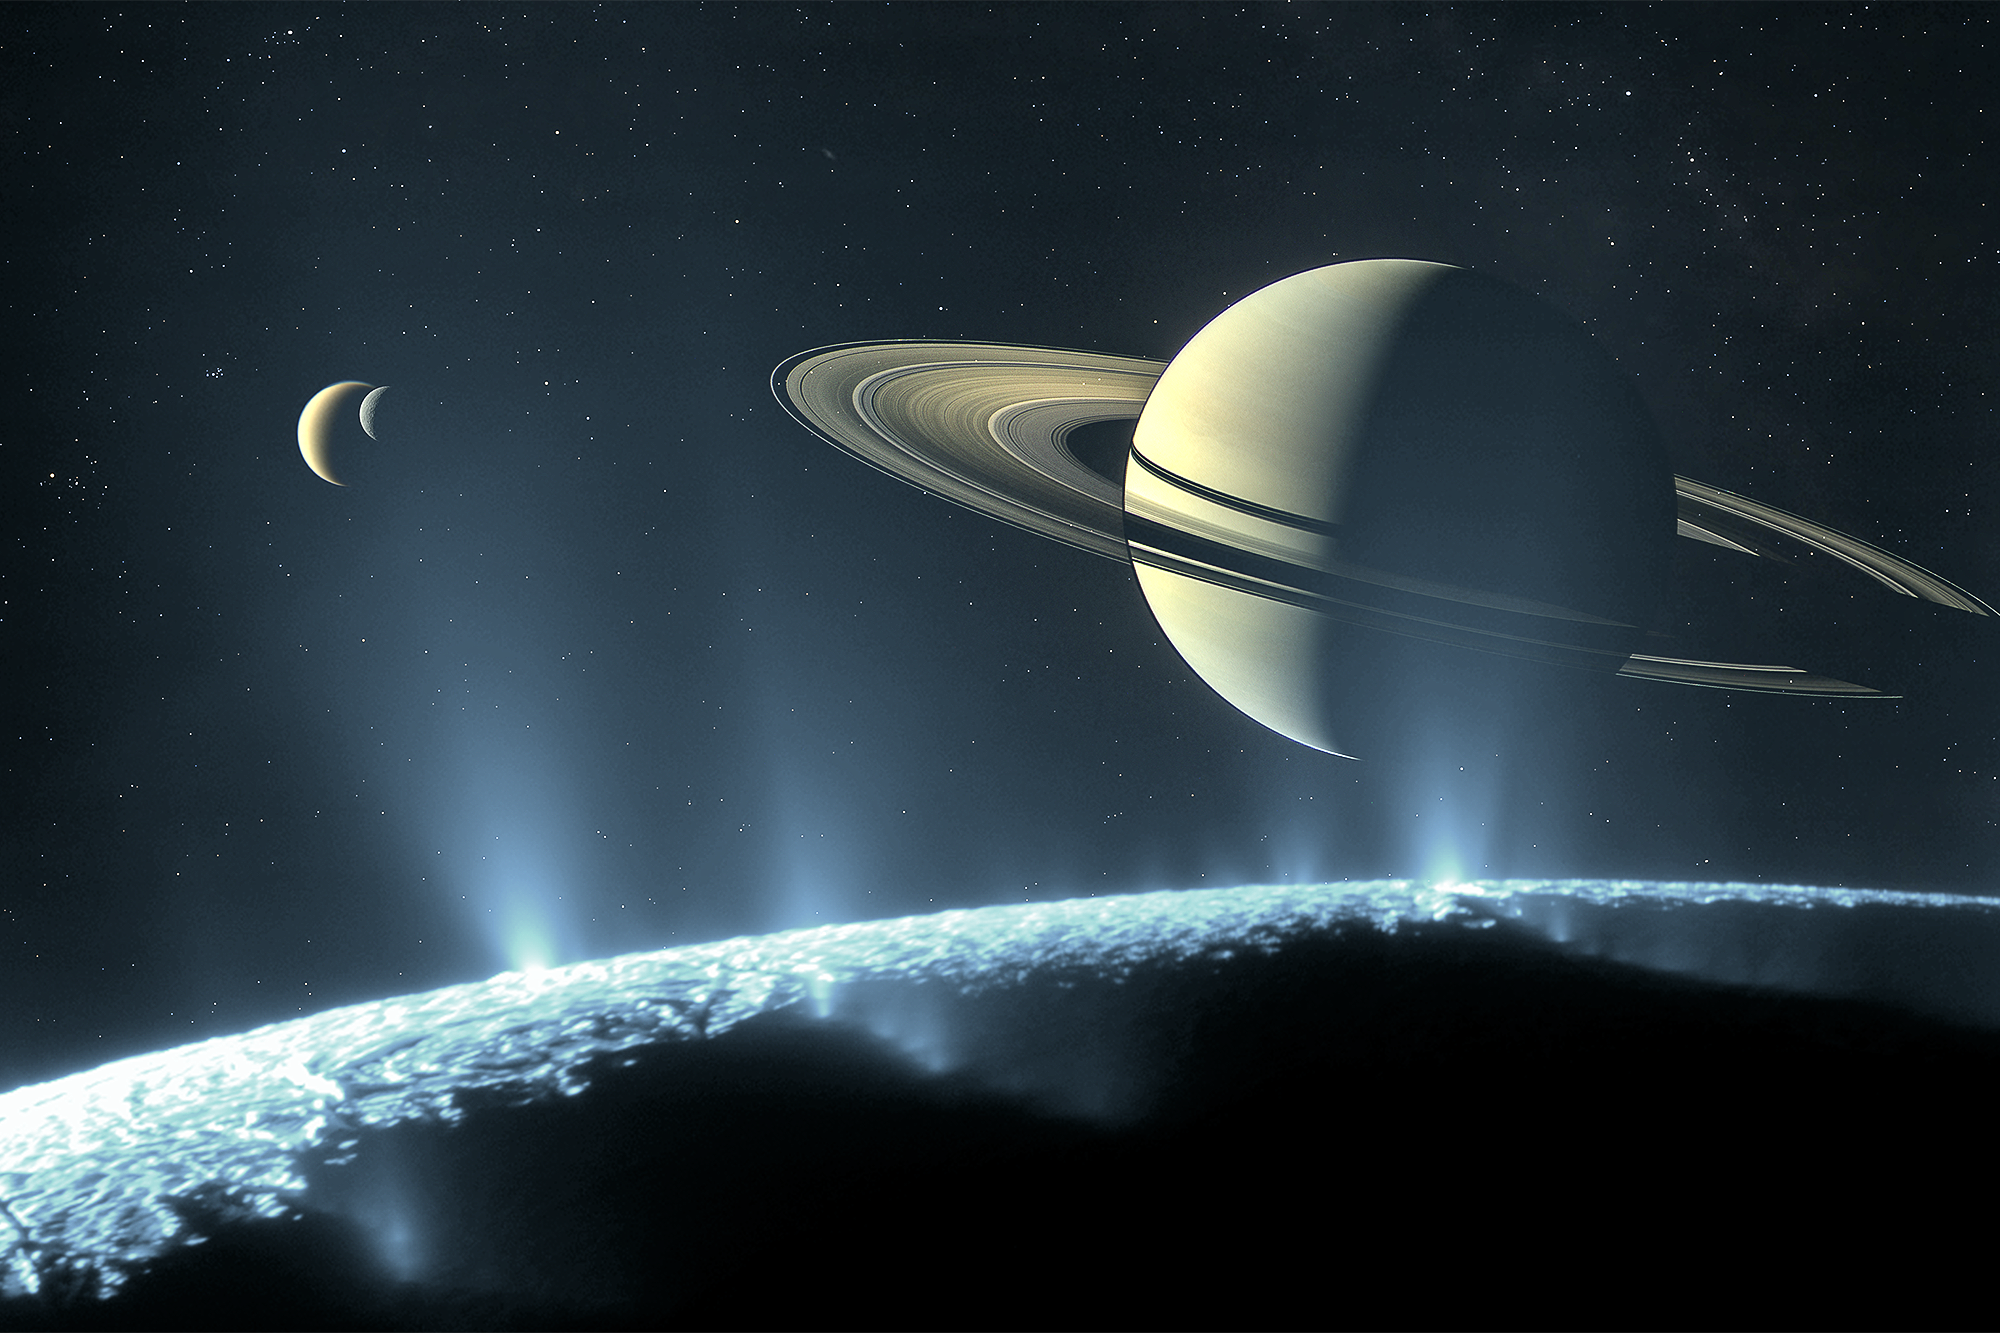 New Evidence Discovered That Saturn's Moon Could Support Life